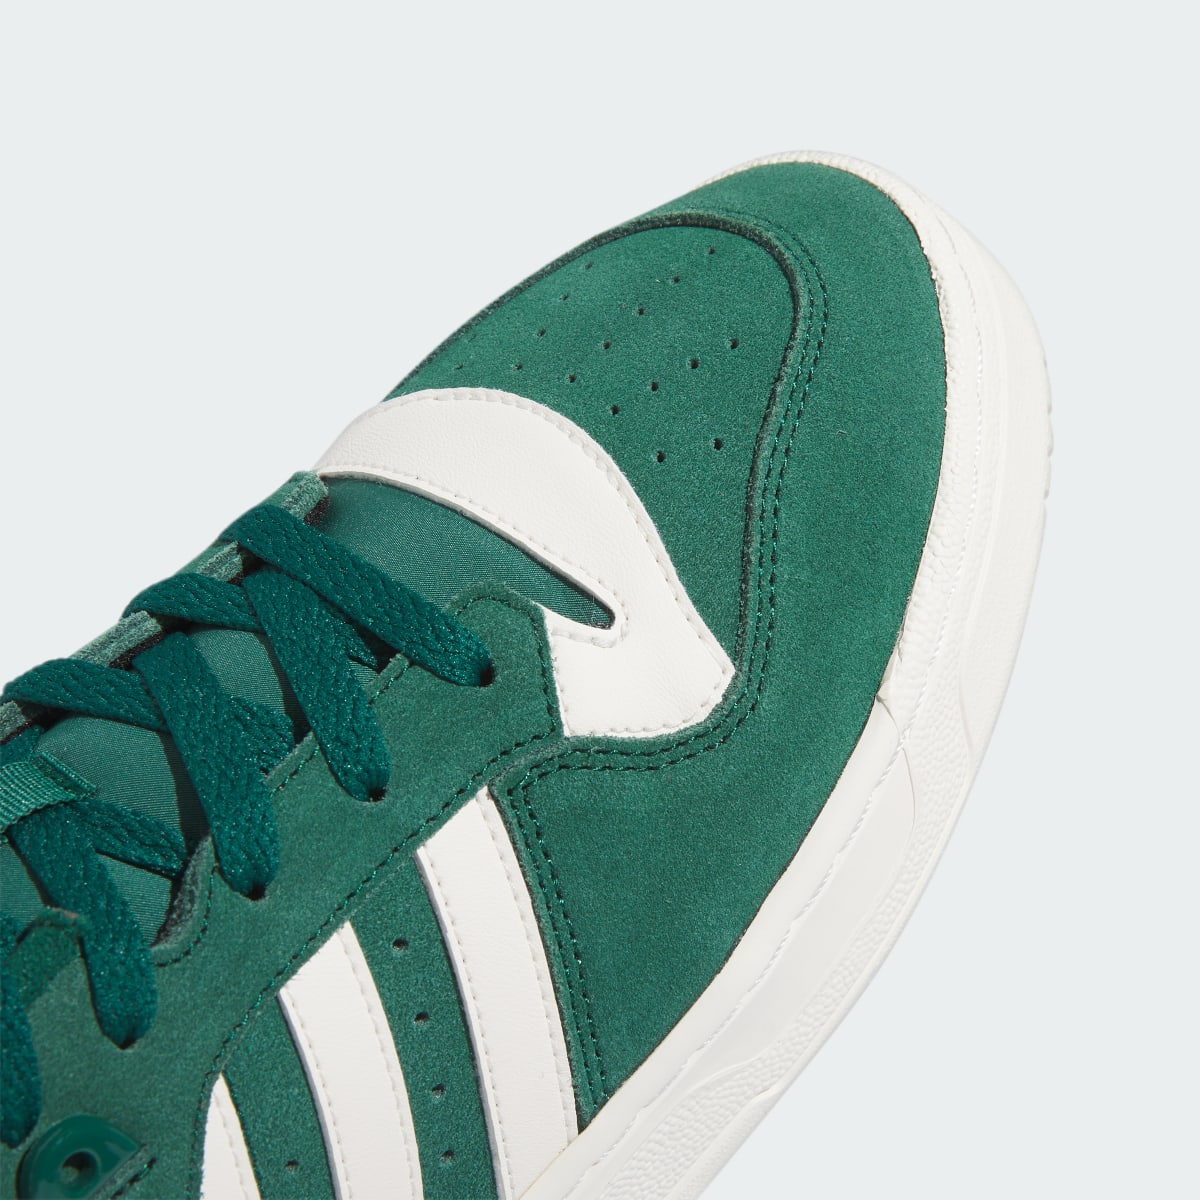 Adidas Chaussure Rivalry Low. 9